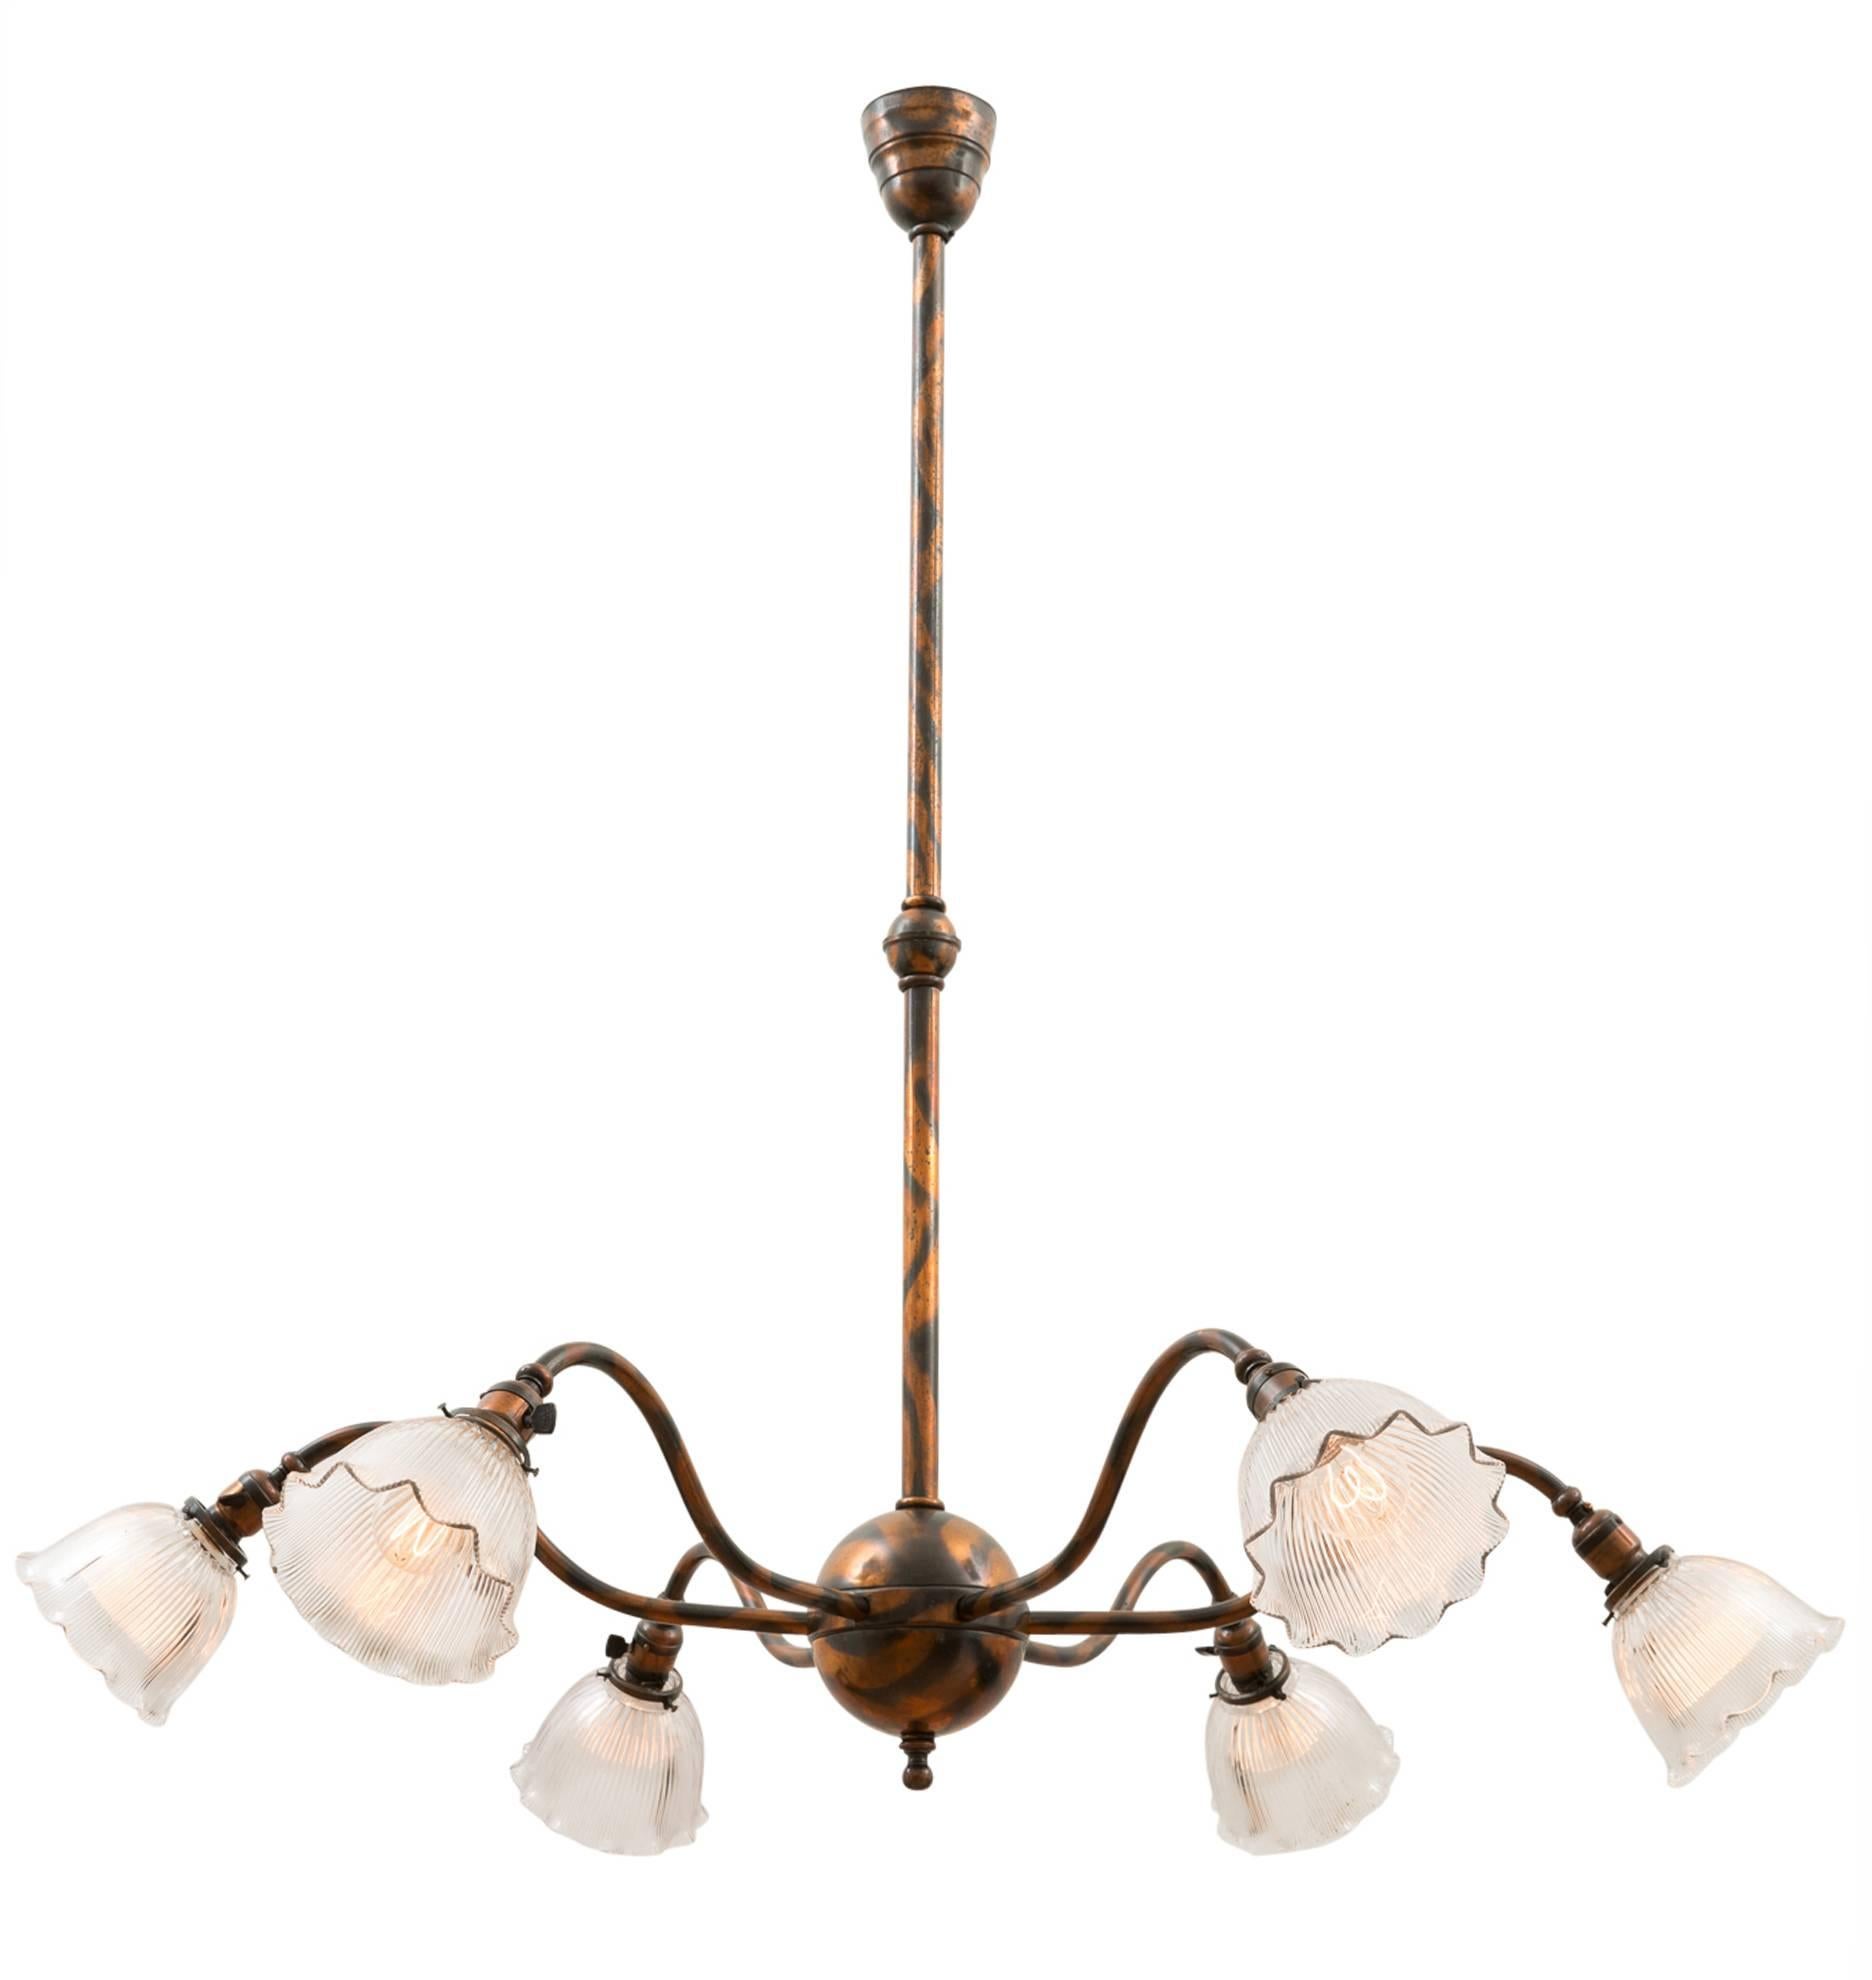 In the world of early electric commercial and Industrial lighting, this fixture is king. We are releasing this fixture from our archive, as it was used by Rejuvenation product designers to launch a line of early-century chandeliers and prismatic